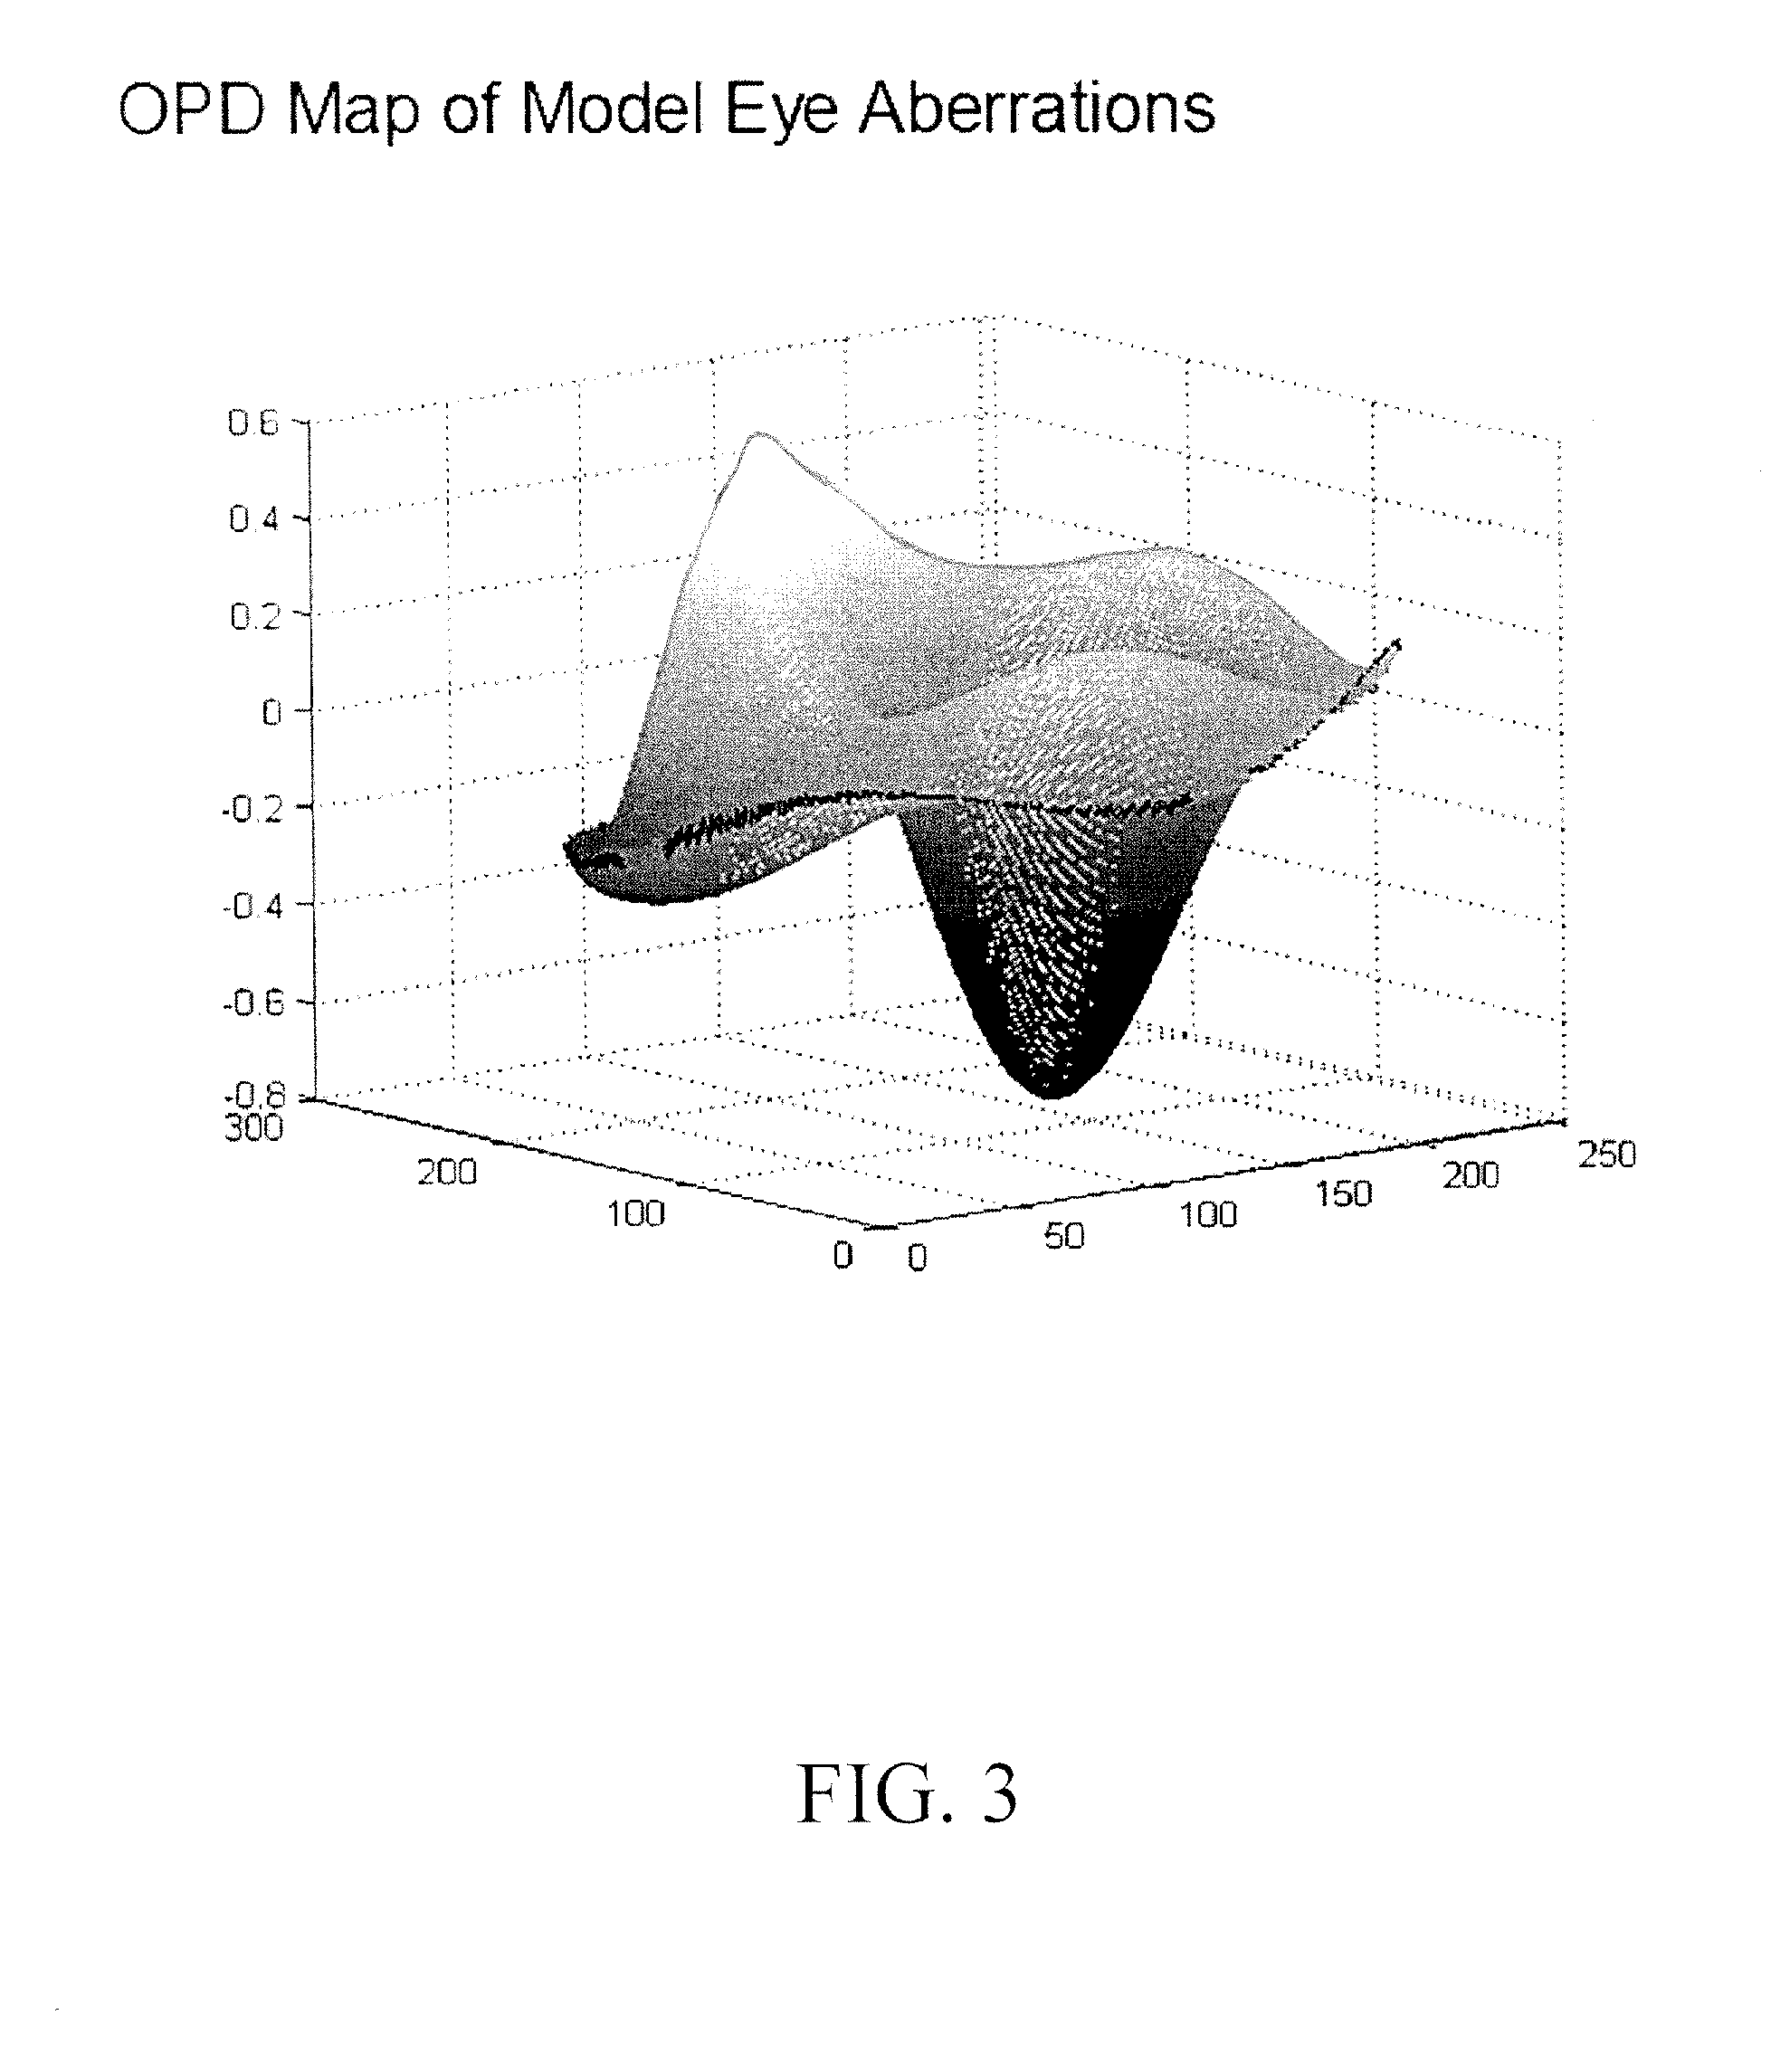 Materials and methods for producing lenses